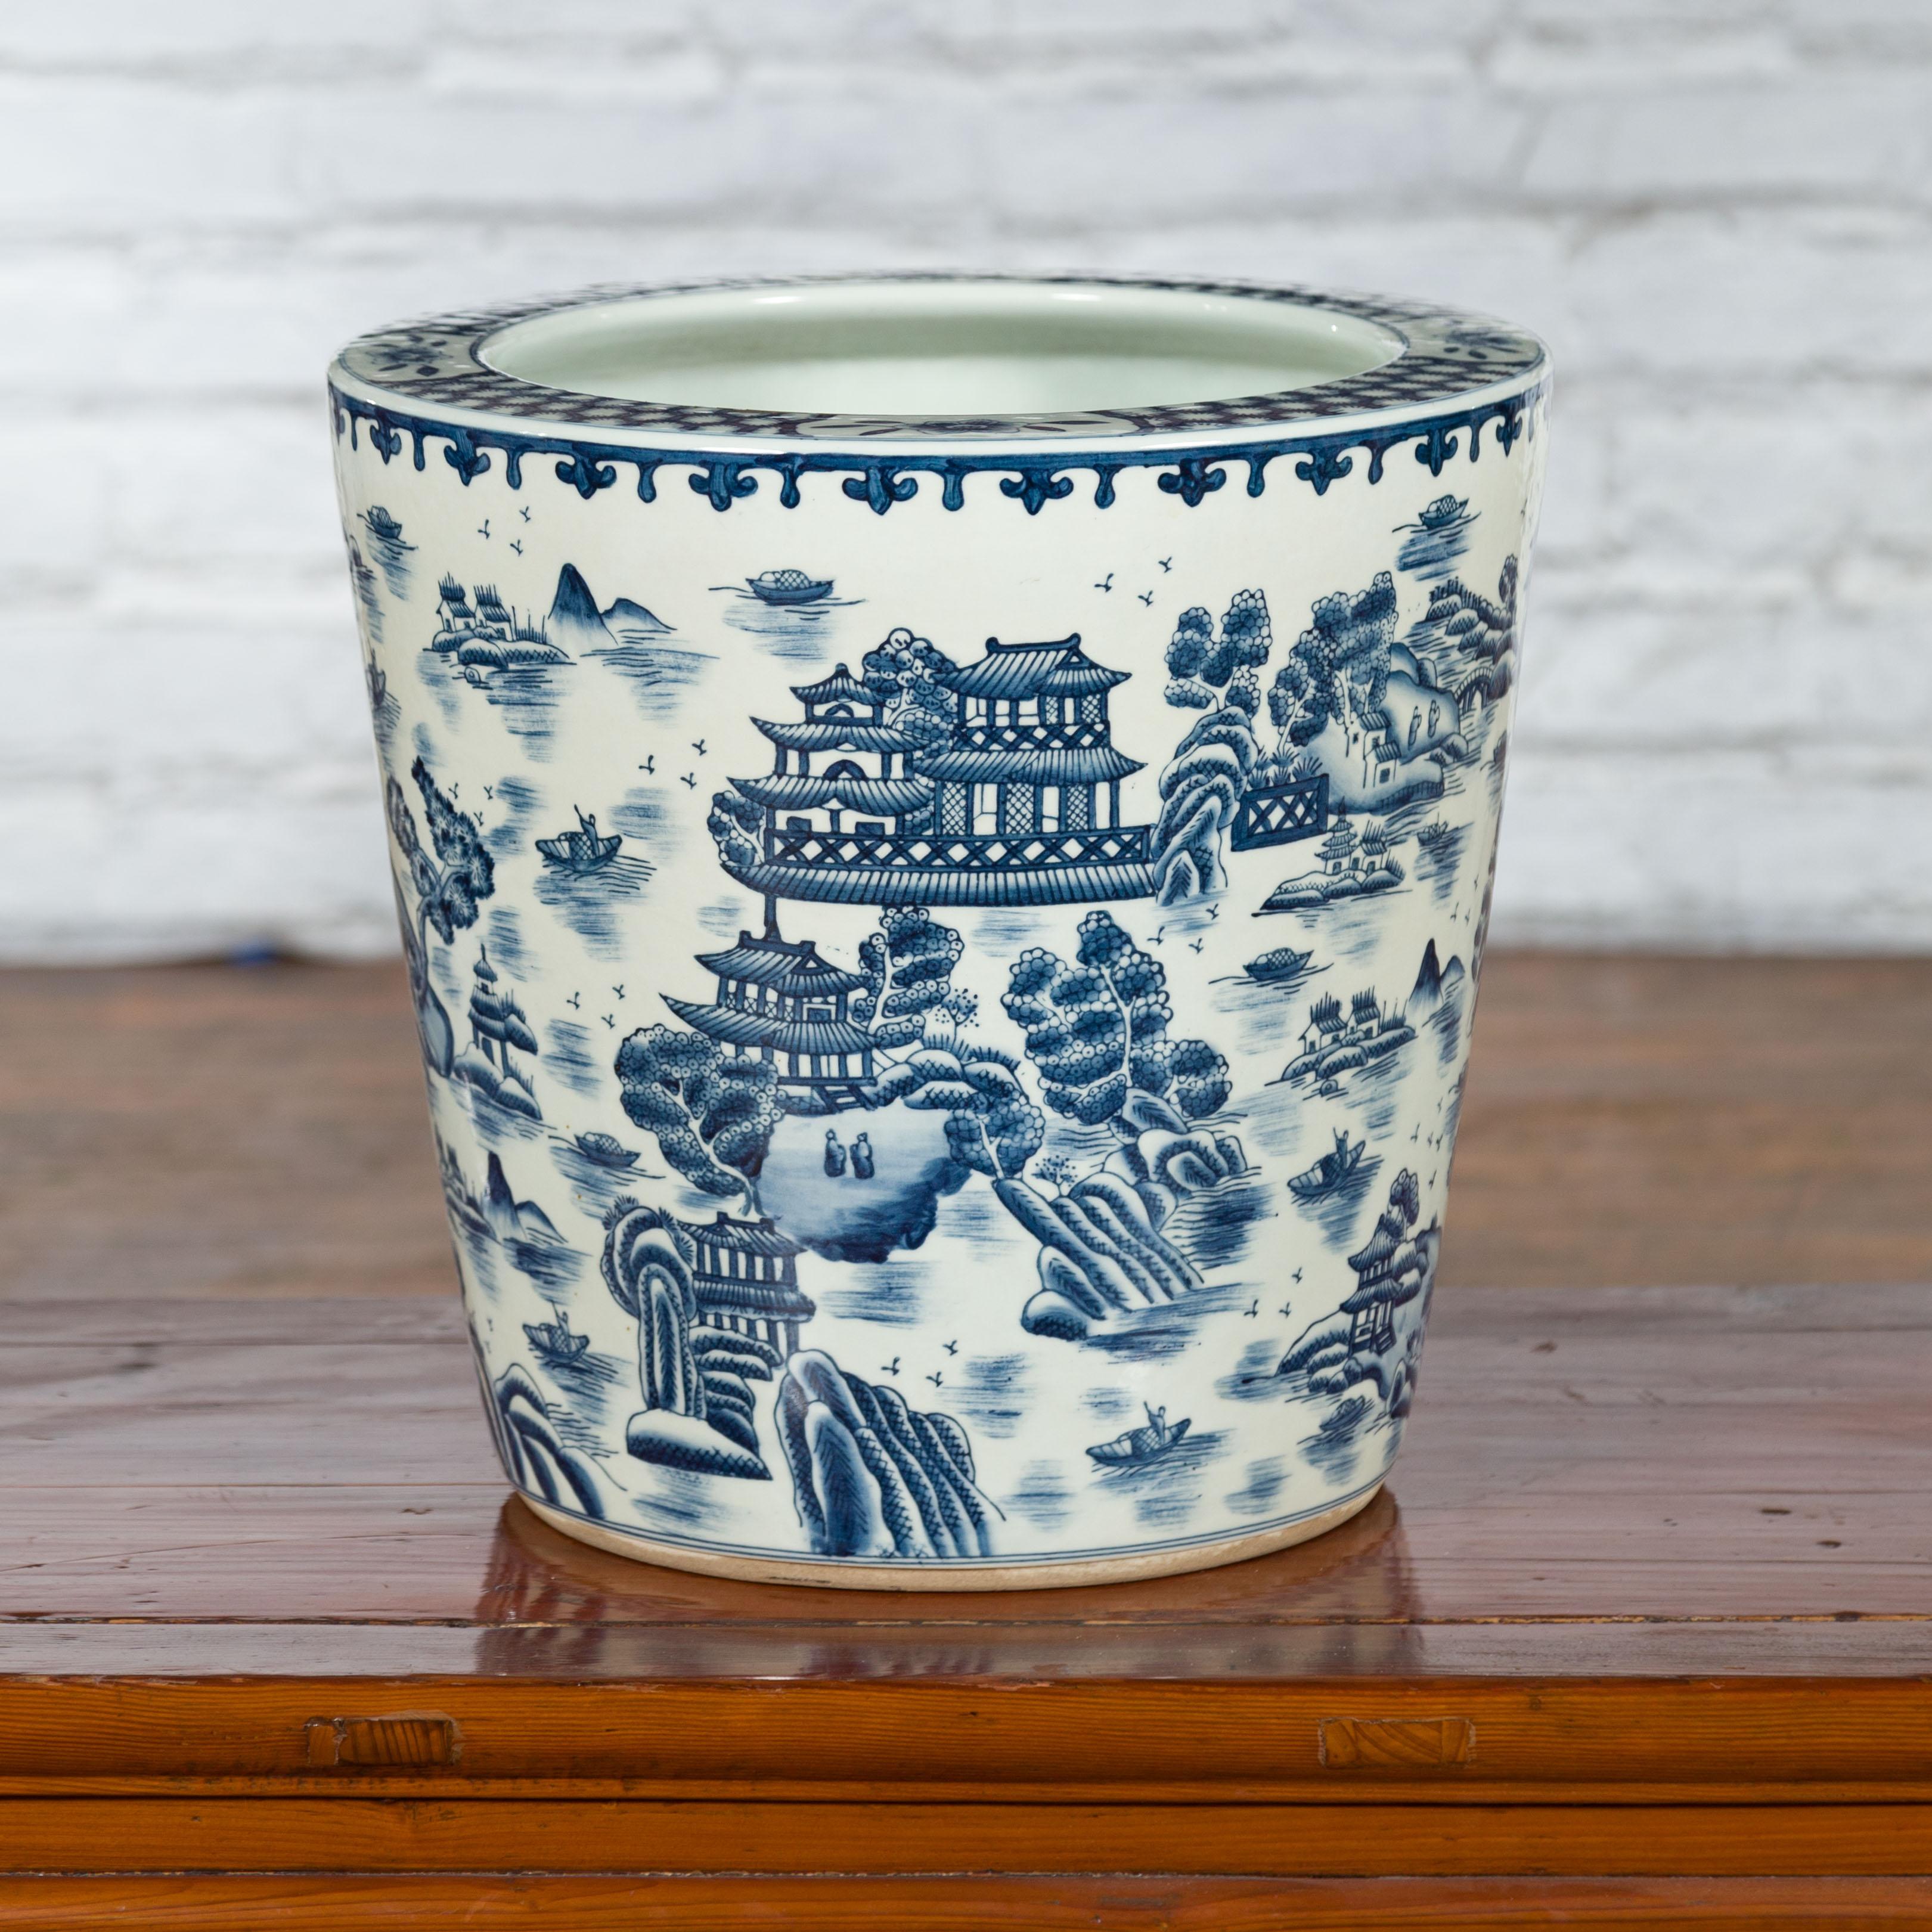 A Chinese vintage porcelain cache-pot planter from the mid 20th century with hand-painted blue and white décor depicting landscapes, architectures and figures in boats patterns. Created in China during the midcentury period, this porcelain cache-pot